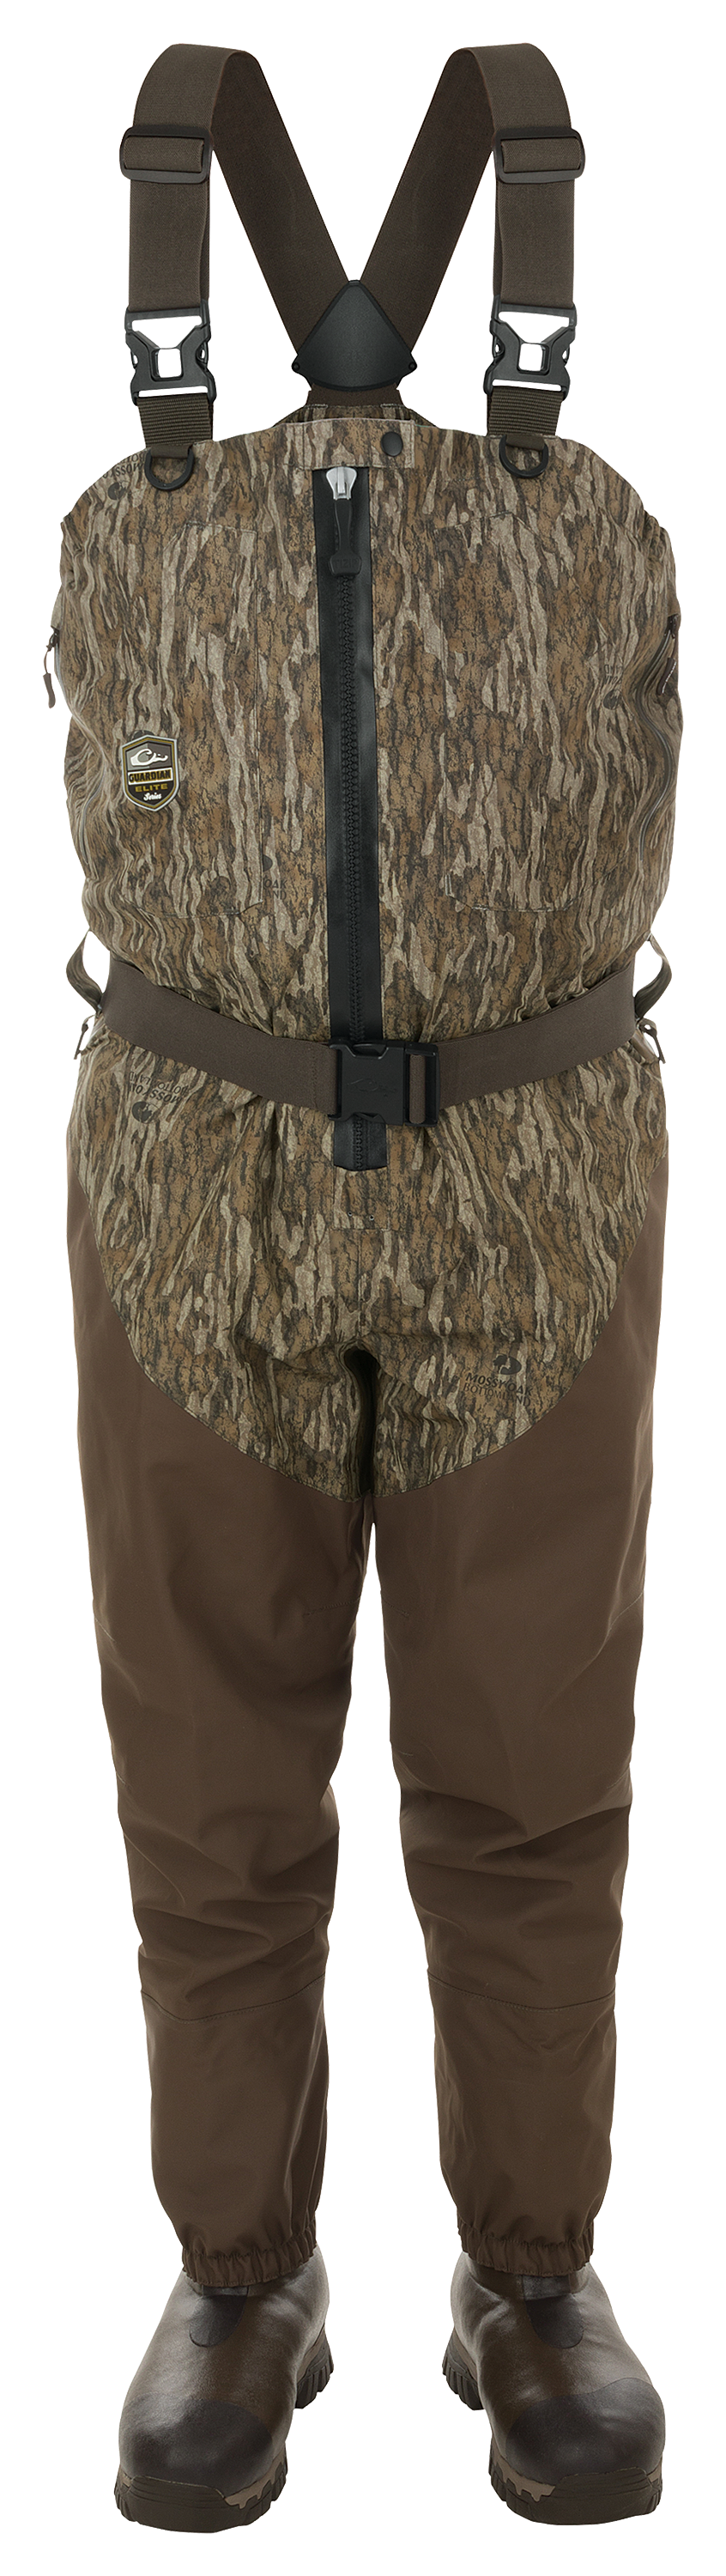 Drake Waterfowl Systems Guardian Elite Front Zip Breathable Waders for Men - Mossy Oak Bottomland - 10/Extra Large